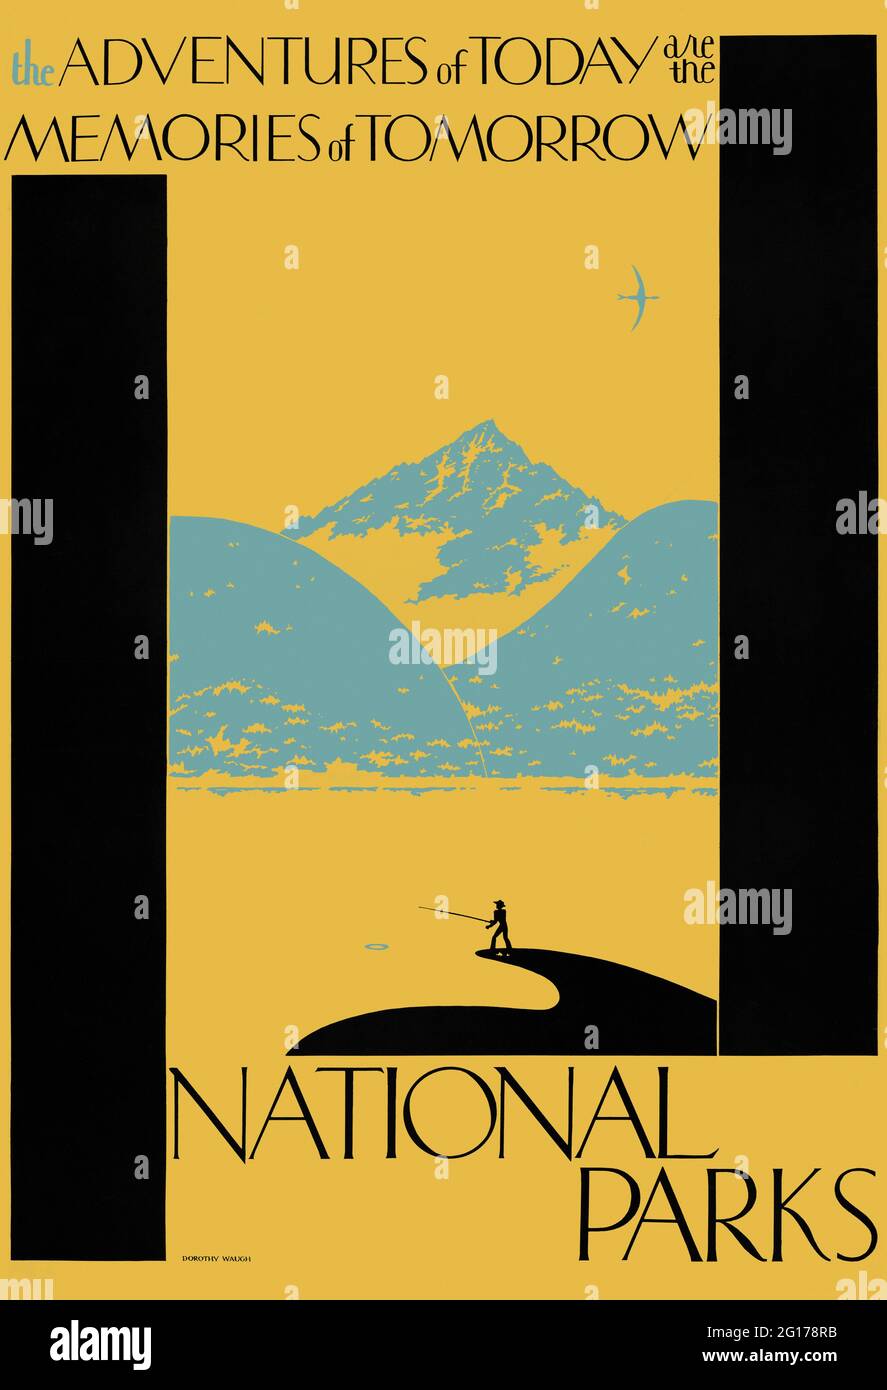 The adventures of today are the memories of tomorrow. National parks by Dorothy Waugh (1896-1996). Restored vintage poster published 1936 in the USA. Stock Photo